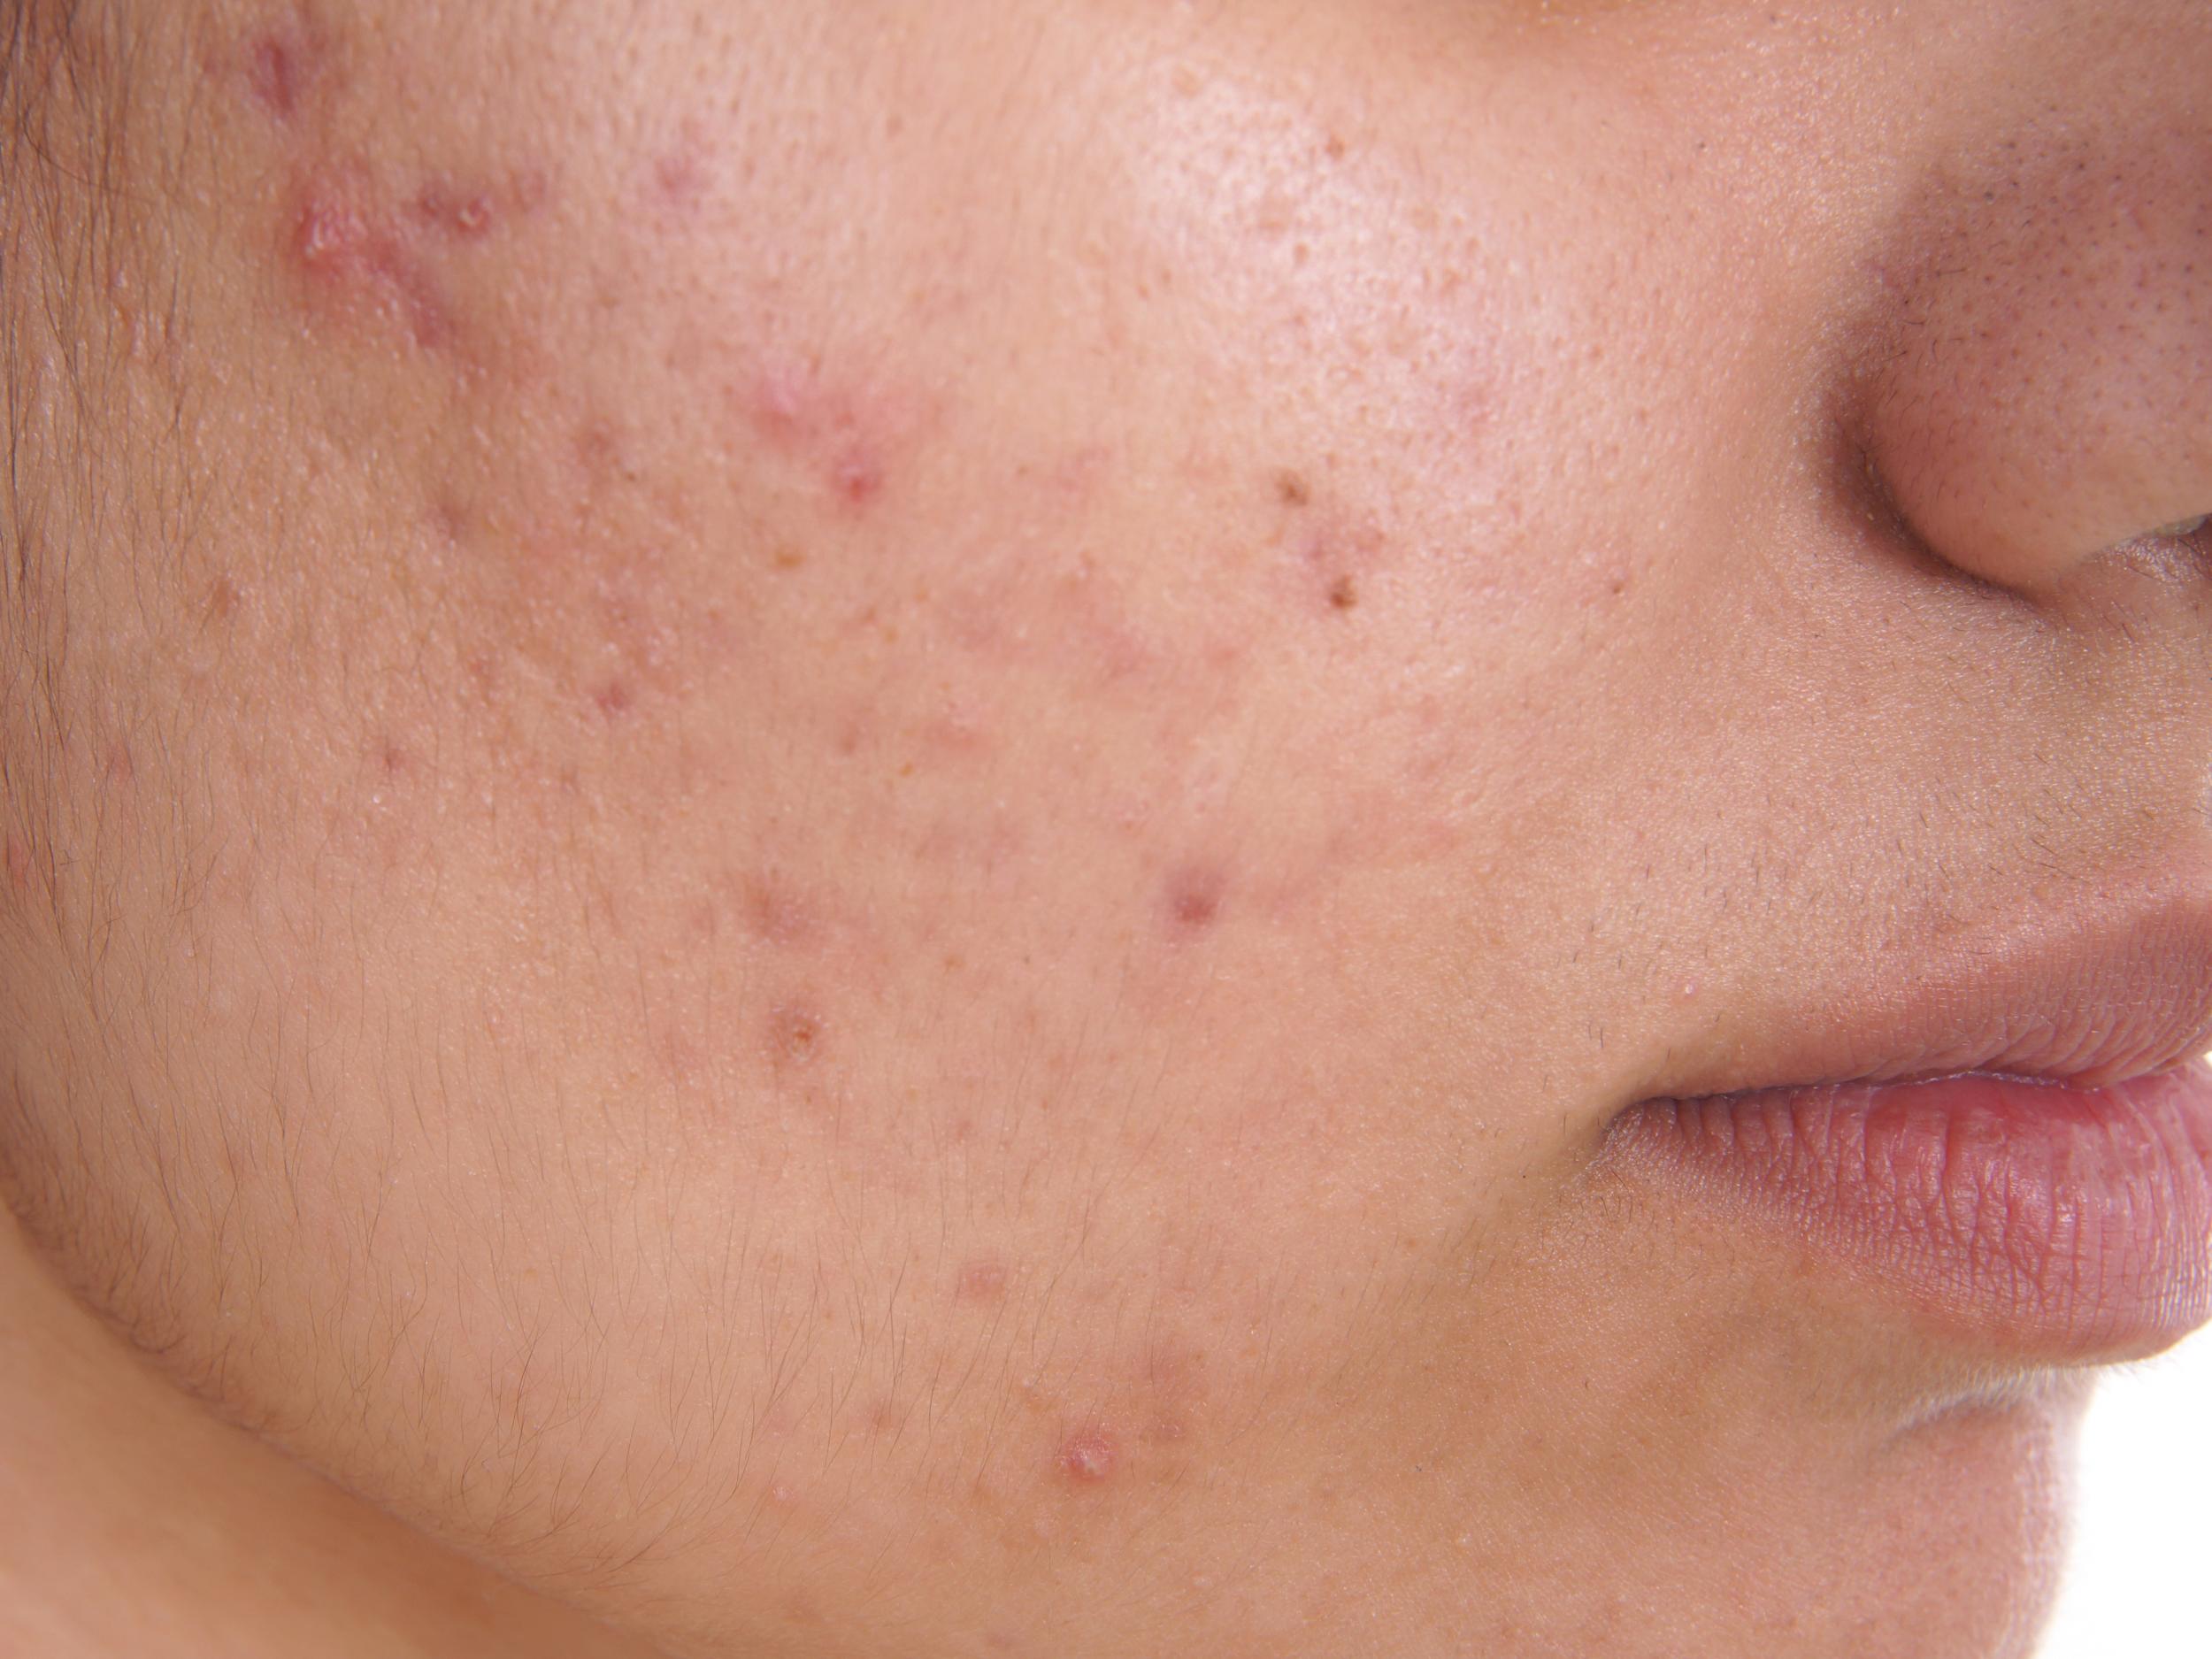 Acne is a very common skin condition that usually starts during puberty